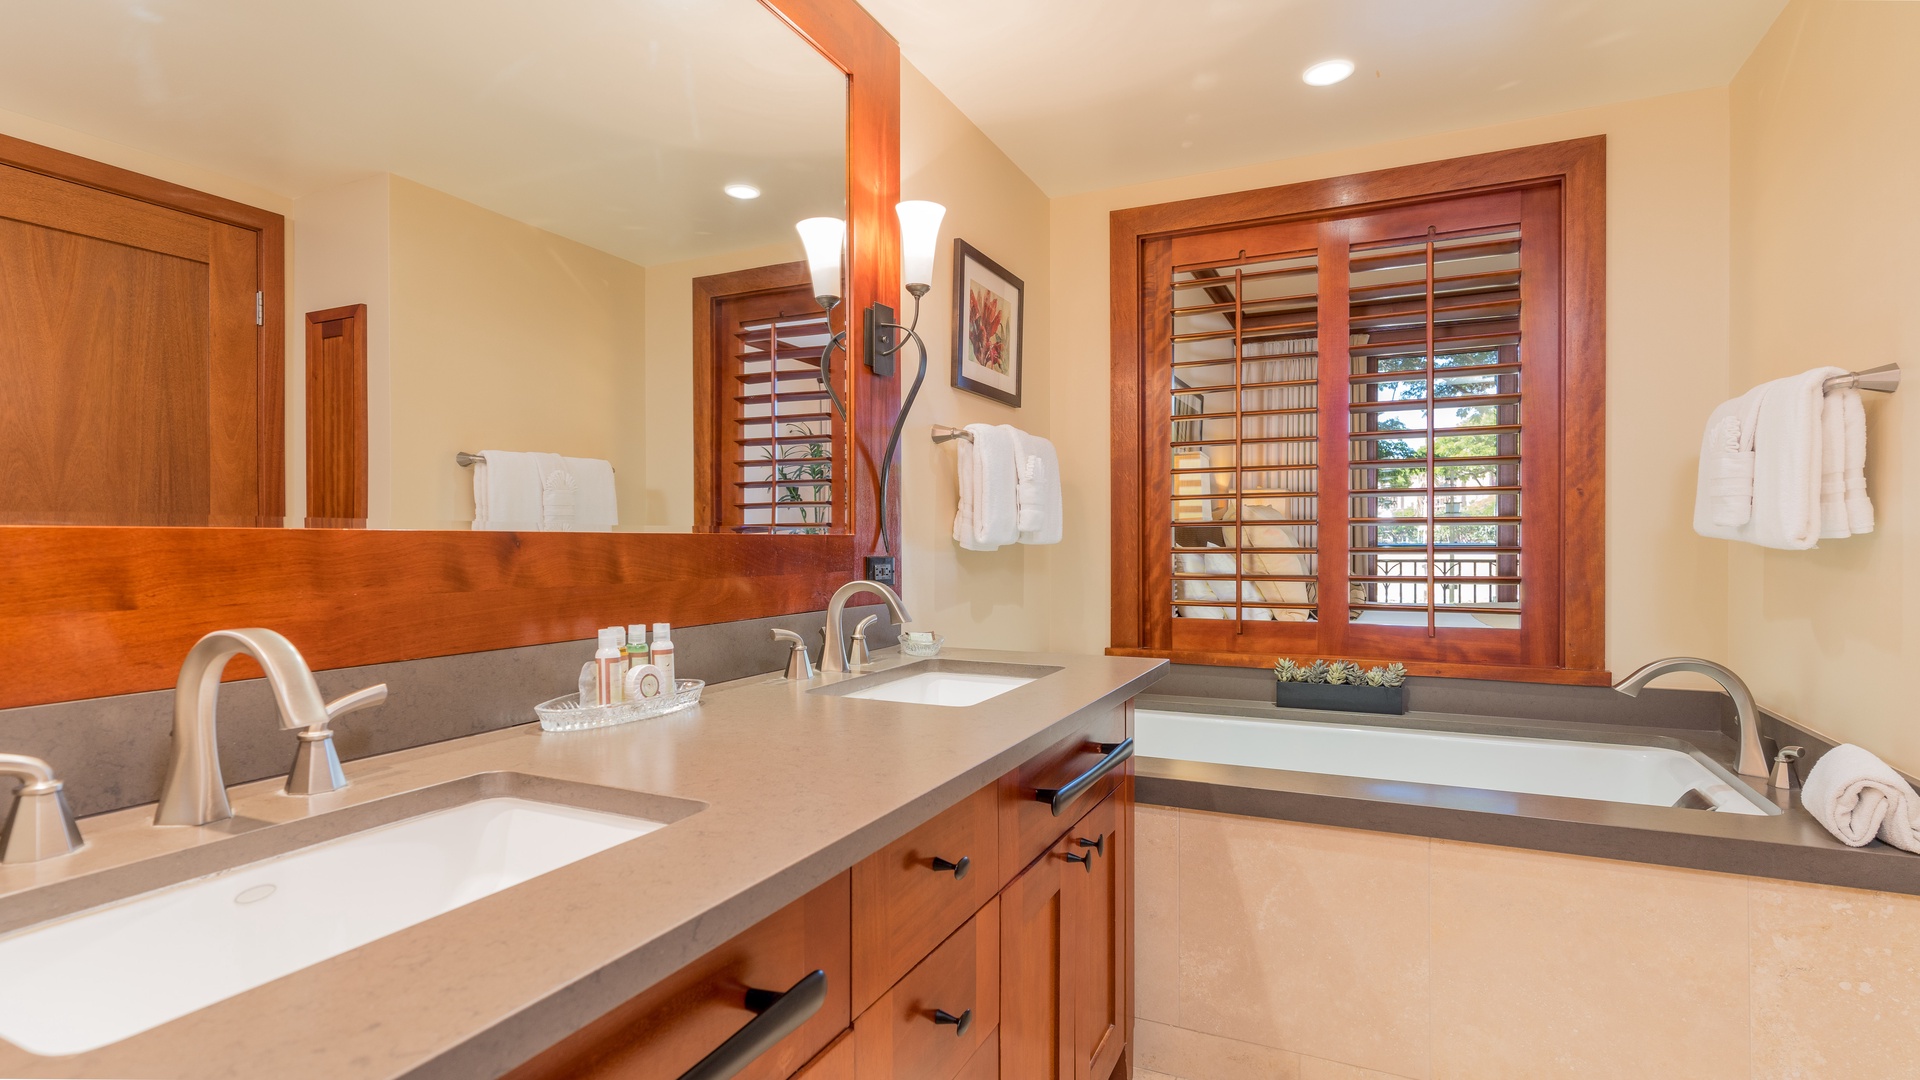 Kapolei Vacation Rentals, Ko Olina Beach Villas B202 - The primary guest bathroom has a soaking tub to relax and unwind.